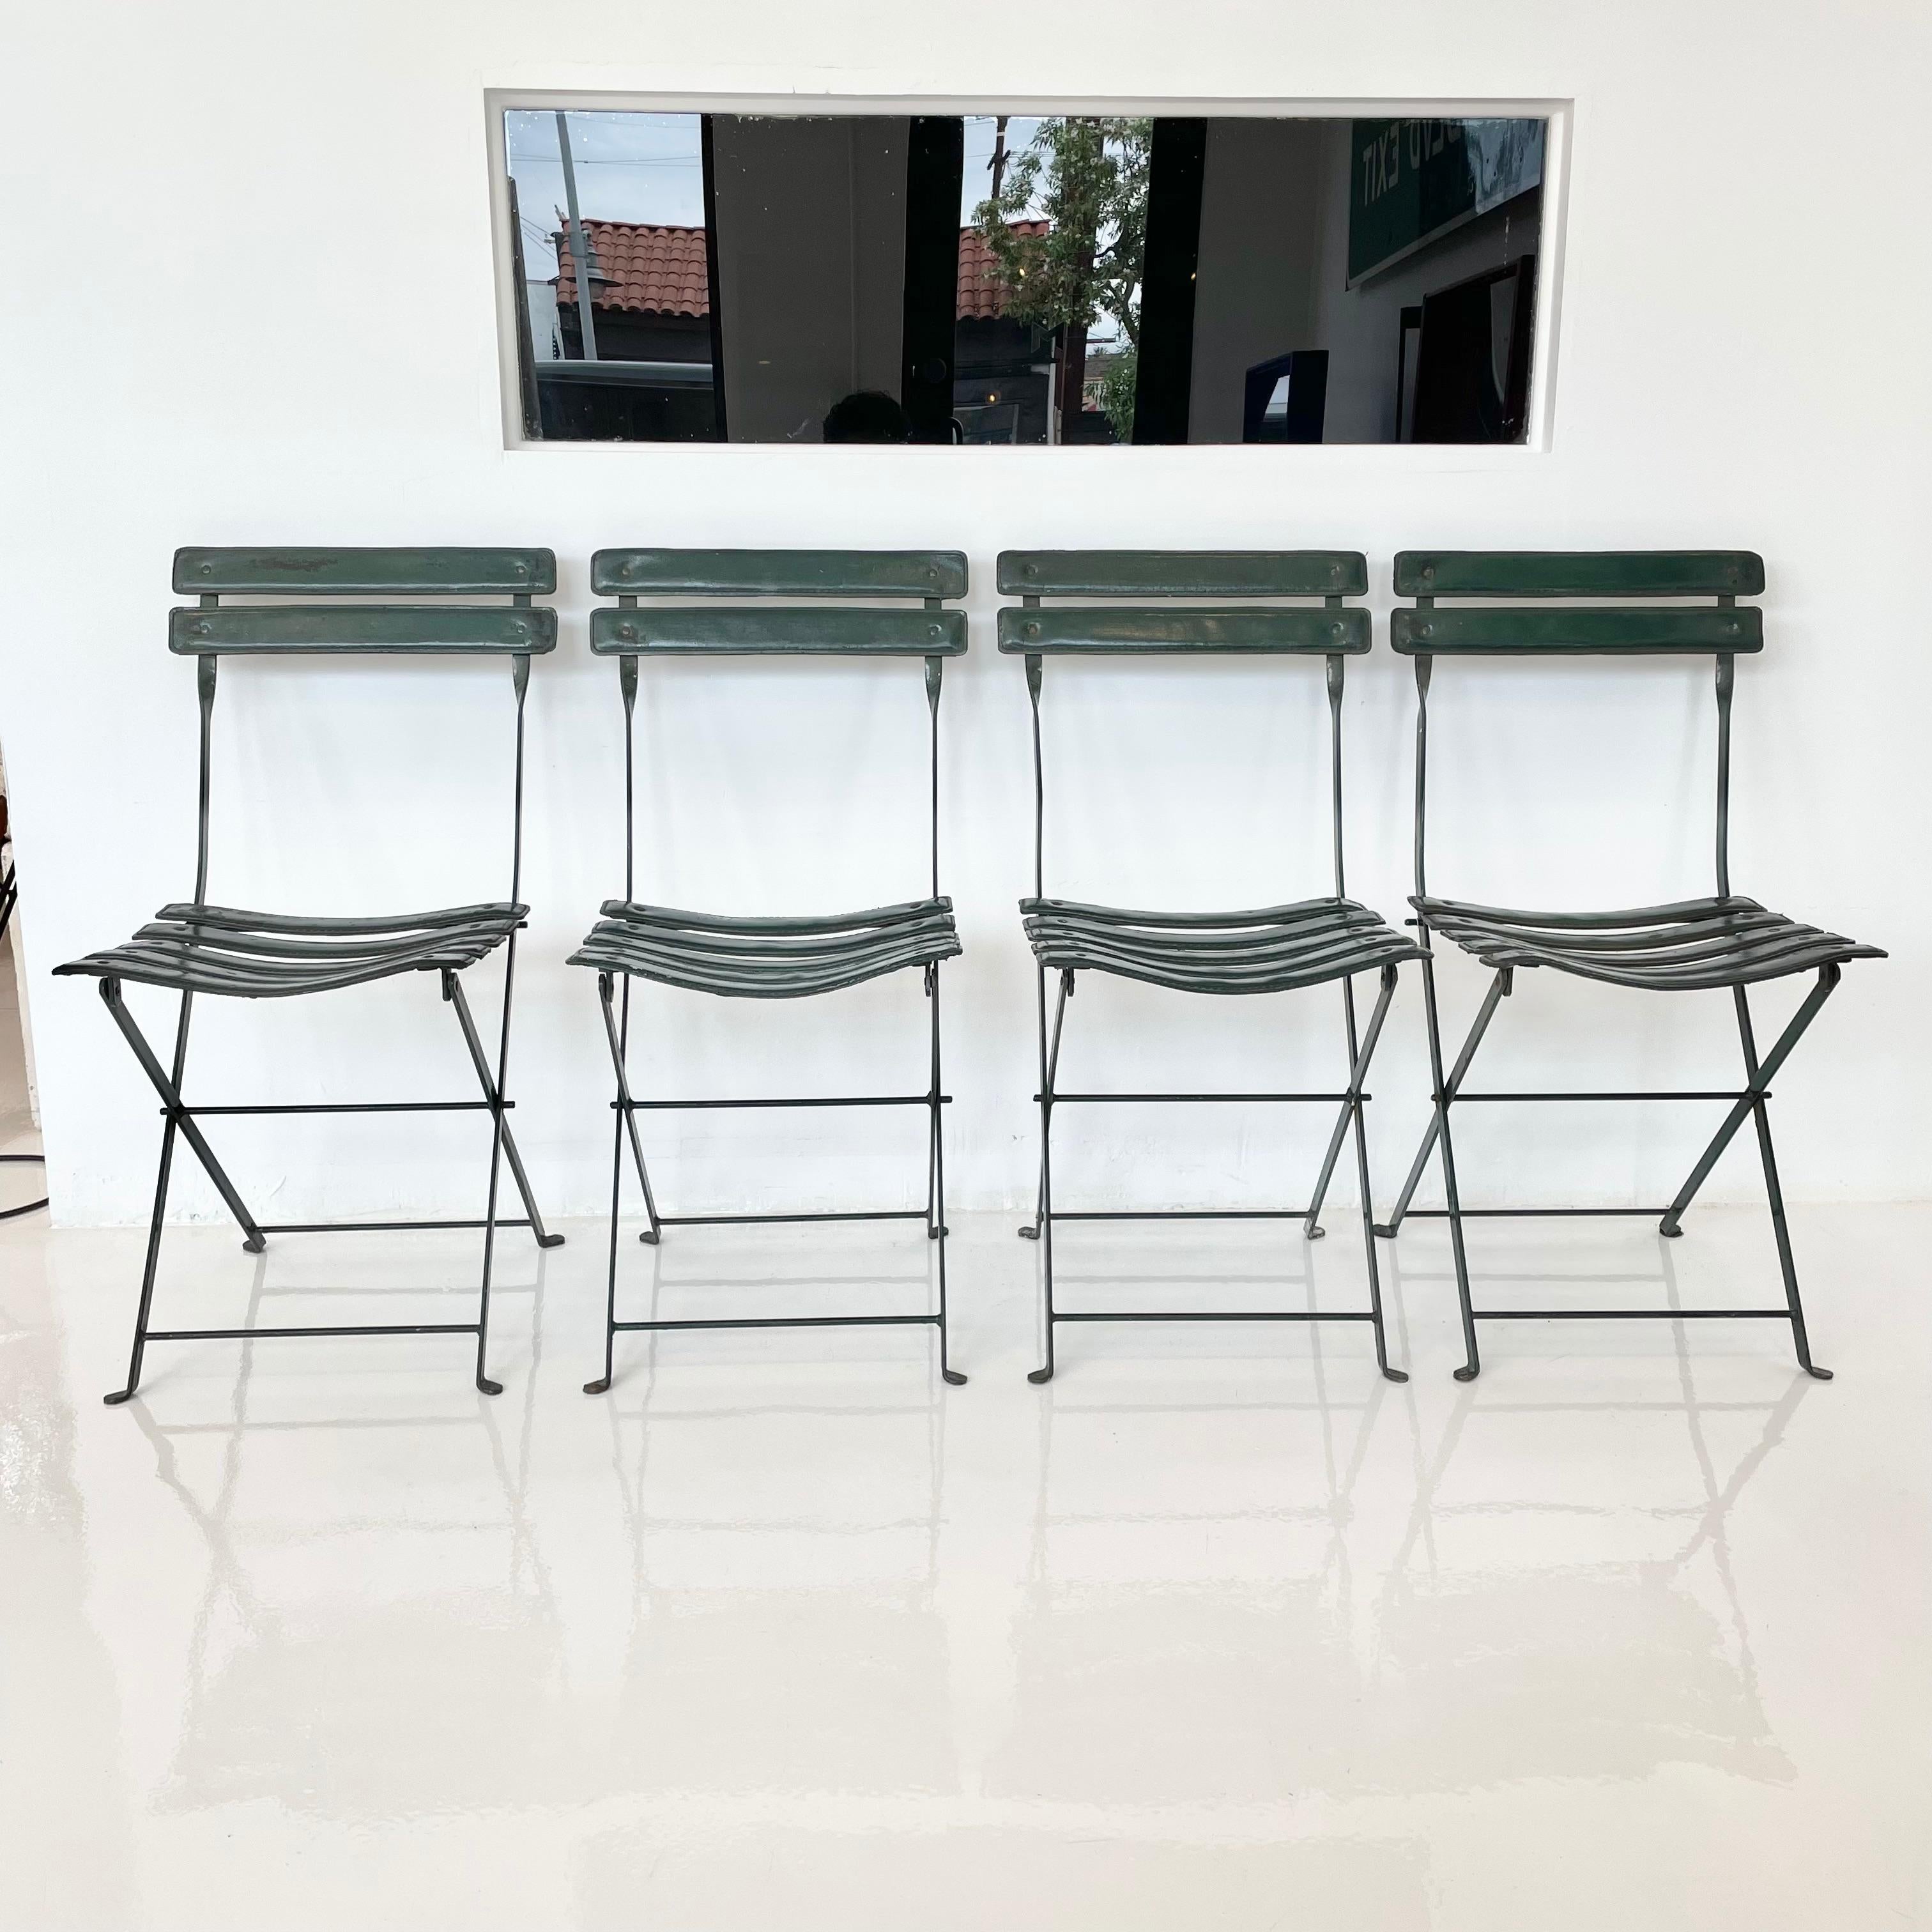 Extremely rare set of 4 dark green folding leather and iron chairs by French designer Jacques Adnet. Slats for seat bottom and seat back all wrapped in leather and supported with a dark green iron frame. Original leather in good condition. Signature